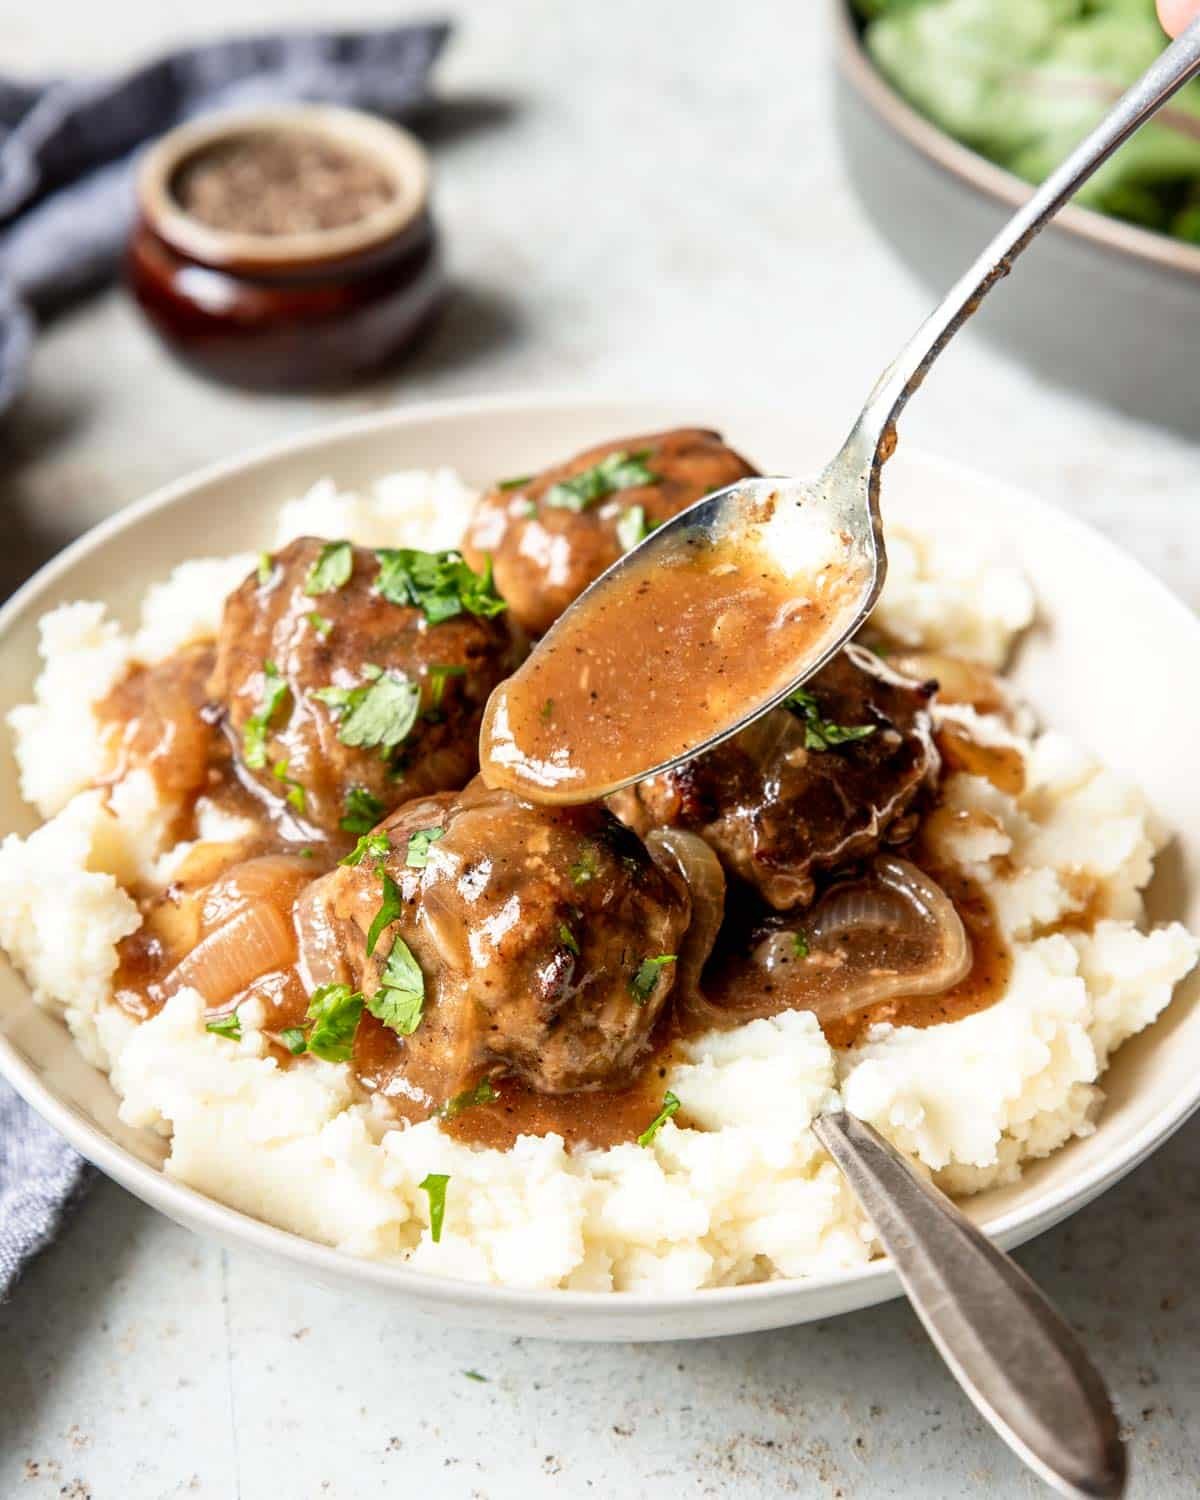 A bowl of mashed potatoes with beef meatballs, with gravy being spooned over top